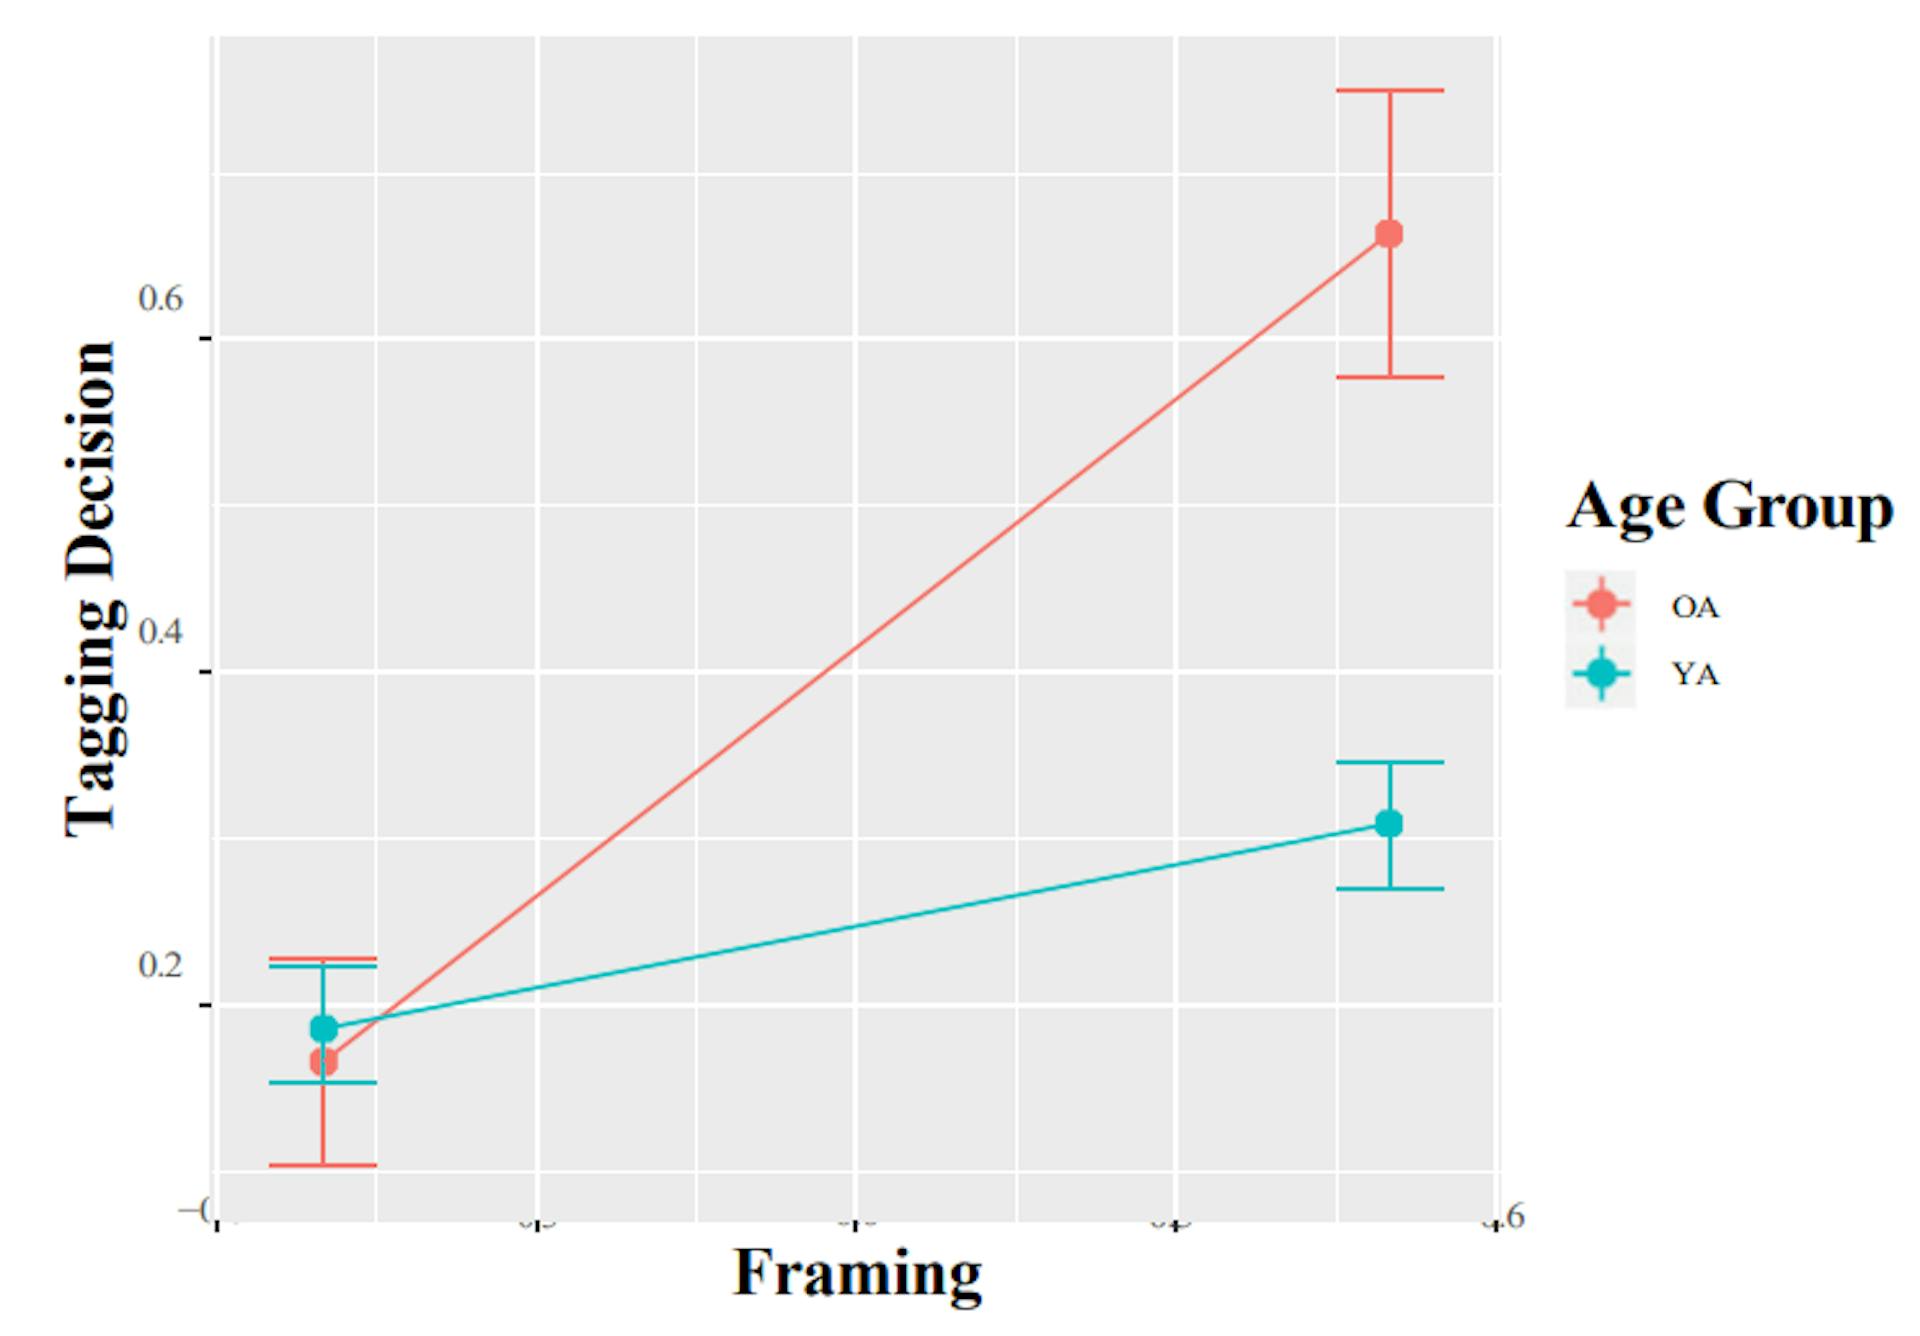 Fig. 7. The y-axis shows the actual tagging decision with zero as reject and one as accept. The graph shows that a positive framing is a more effective dark pattern strategy for older adults in terms of inducing disclosure.